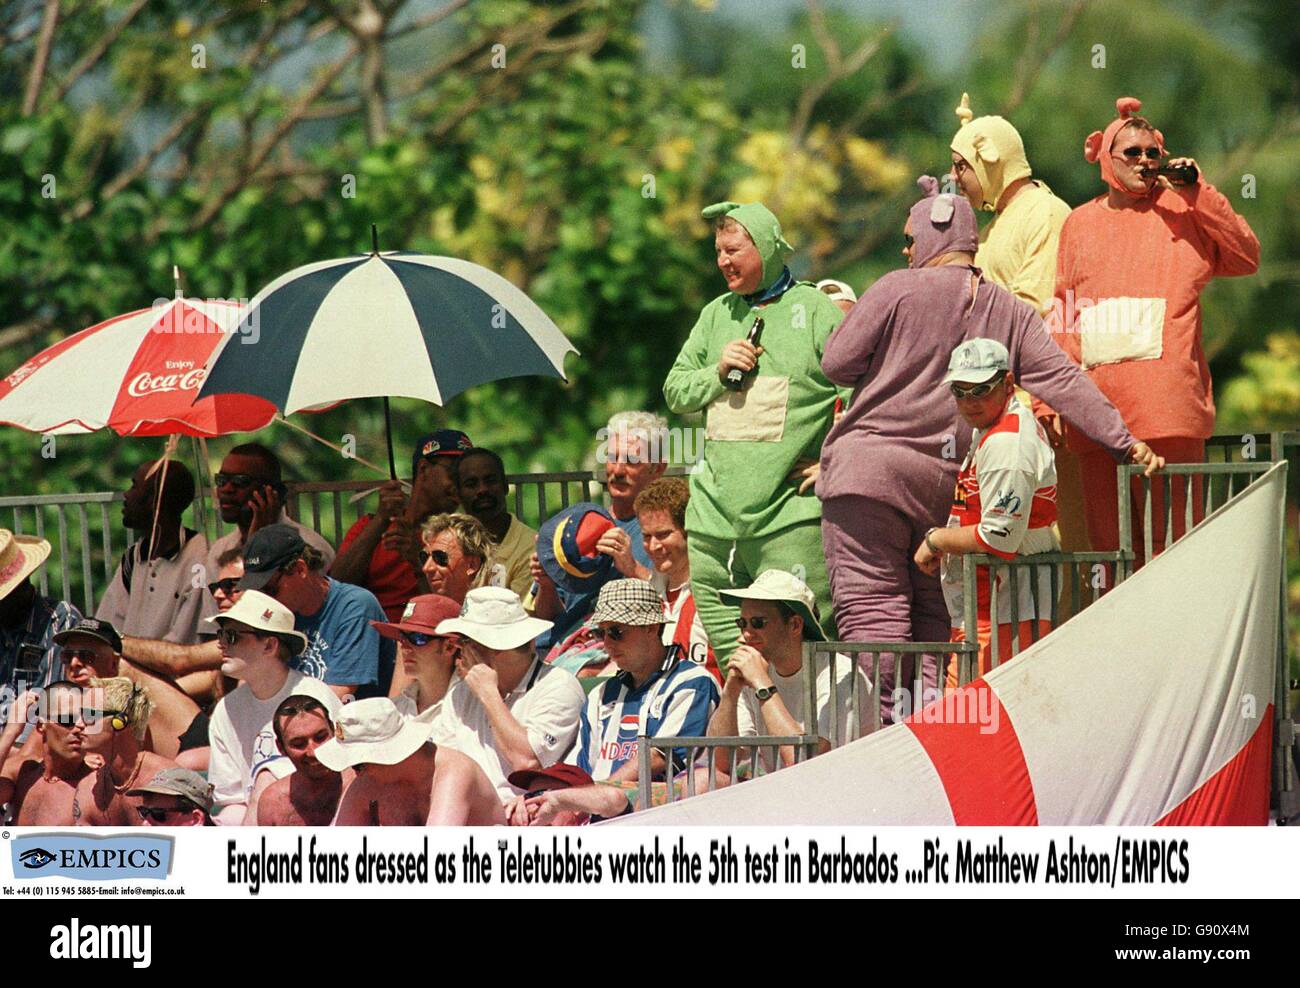 Cricket - Fifth Test - West Indies v England - Barbados - First Day. England fans dressed as the Teletubbies watch the fifth test Stock Photo